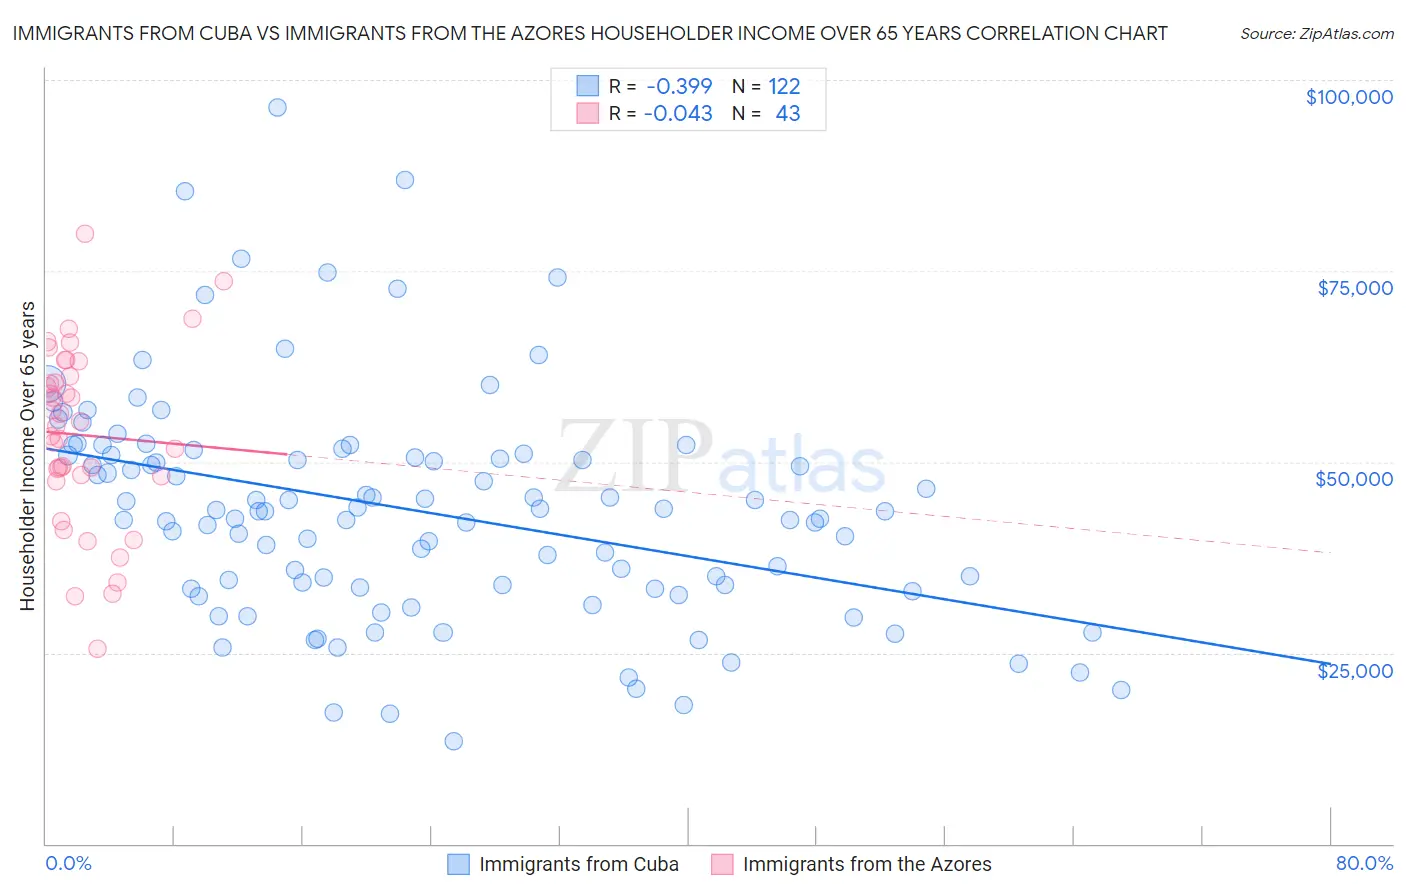 Immigrants from Cuba vs Immigrants from the Azores Householder Income Over 65 years